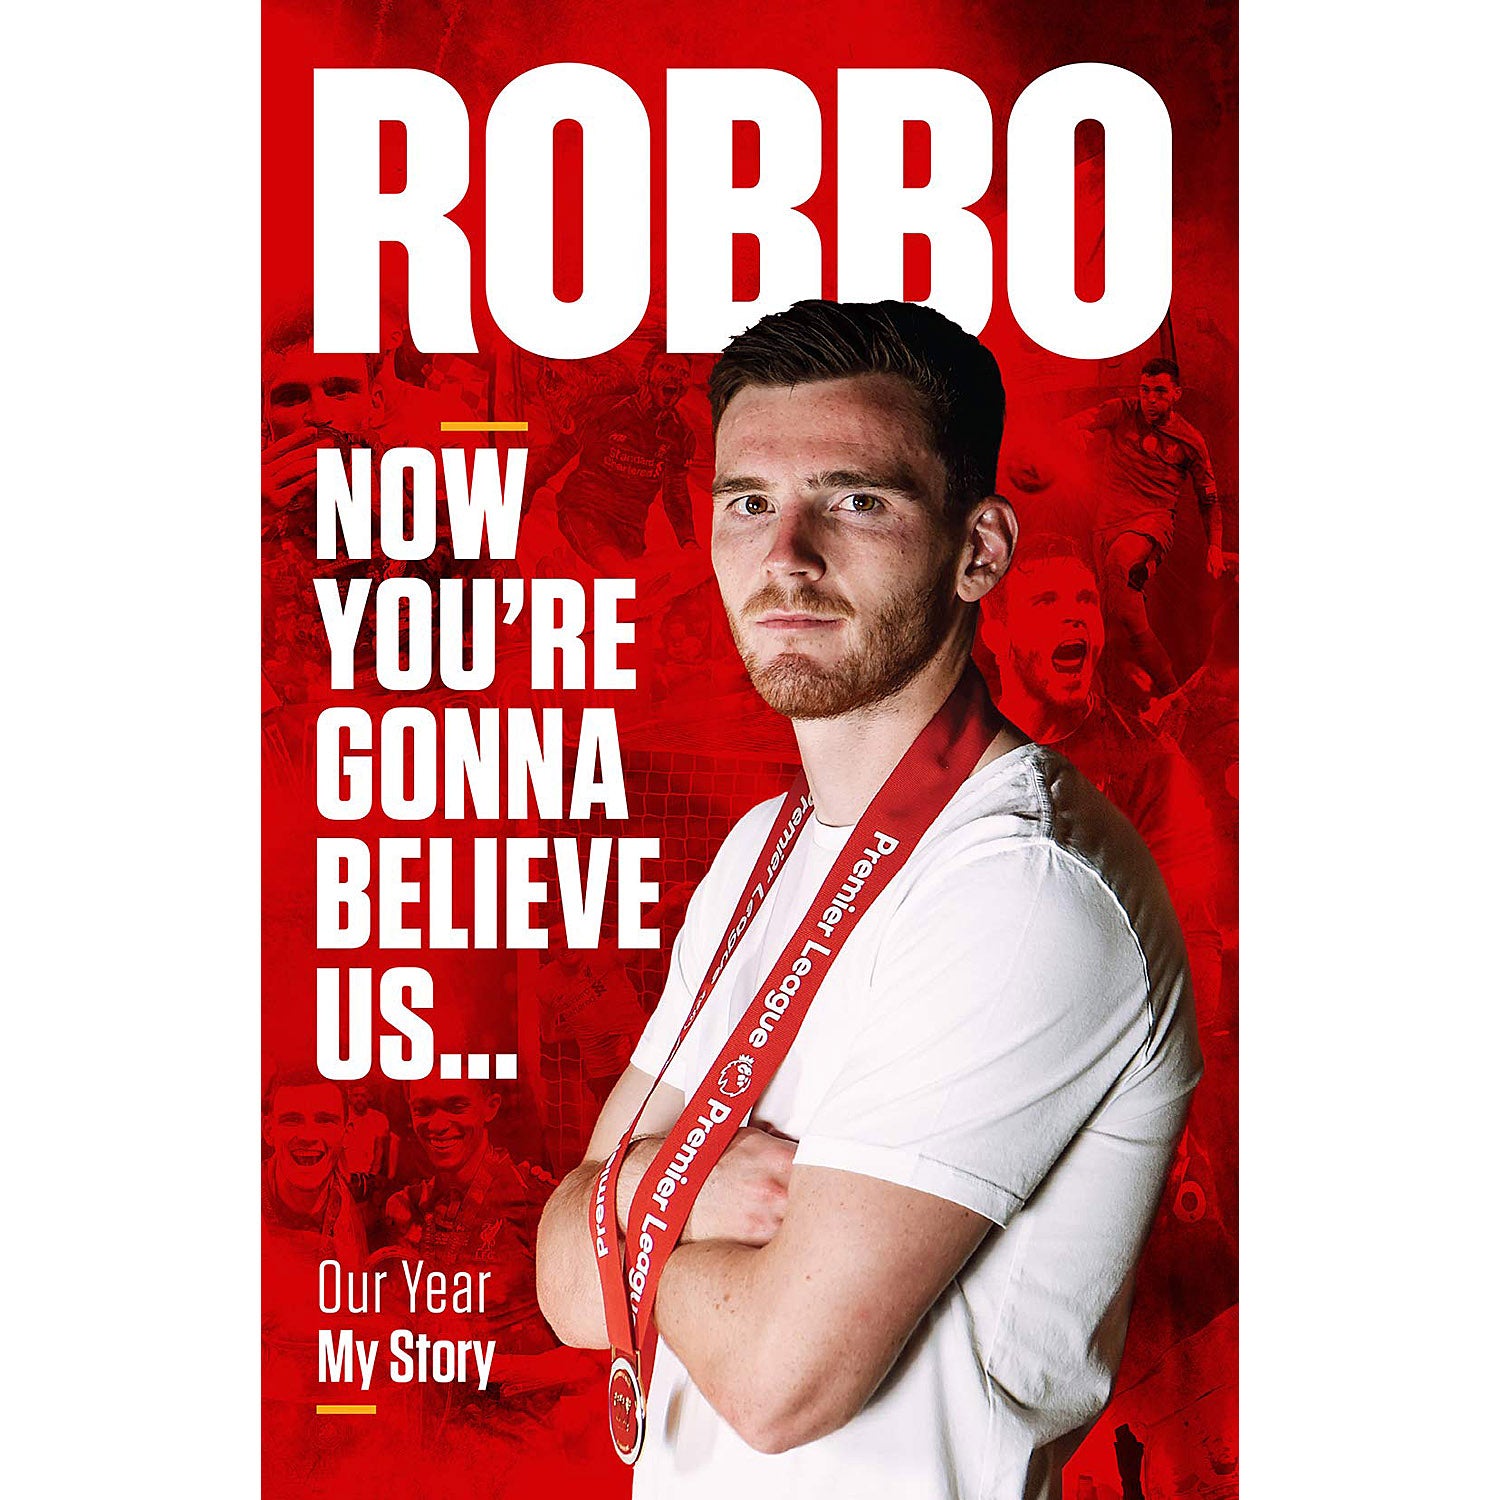 Robbo – Now You're Gonna Believe Us… – Andy Robertson – Our Year, My Story